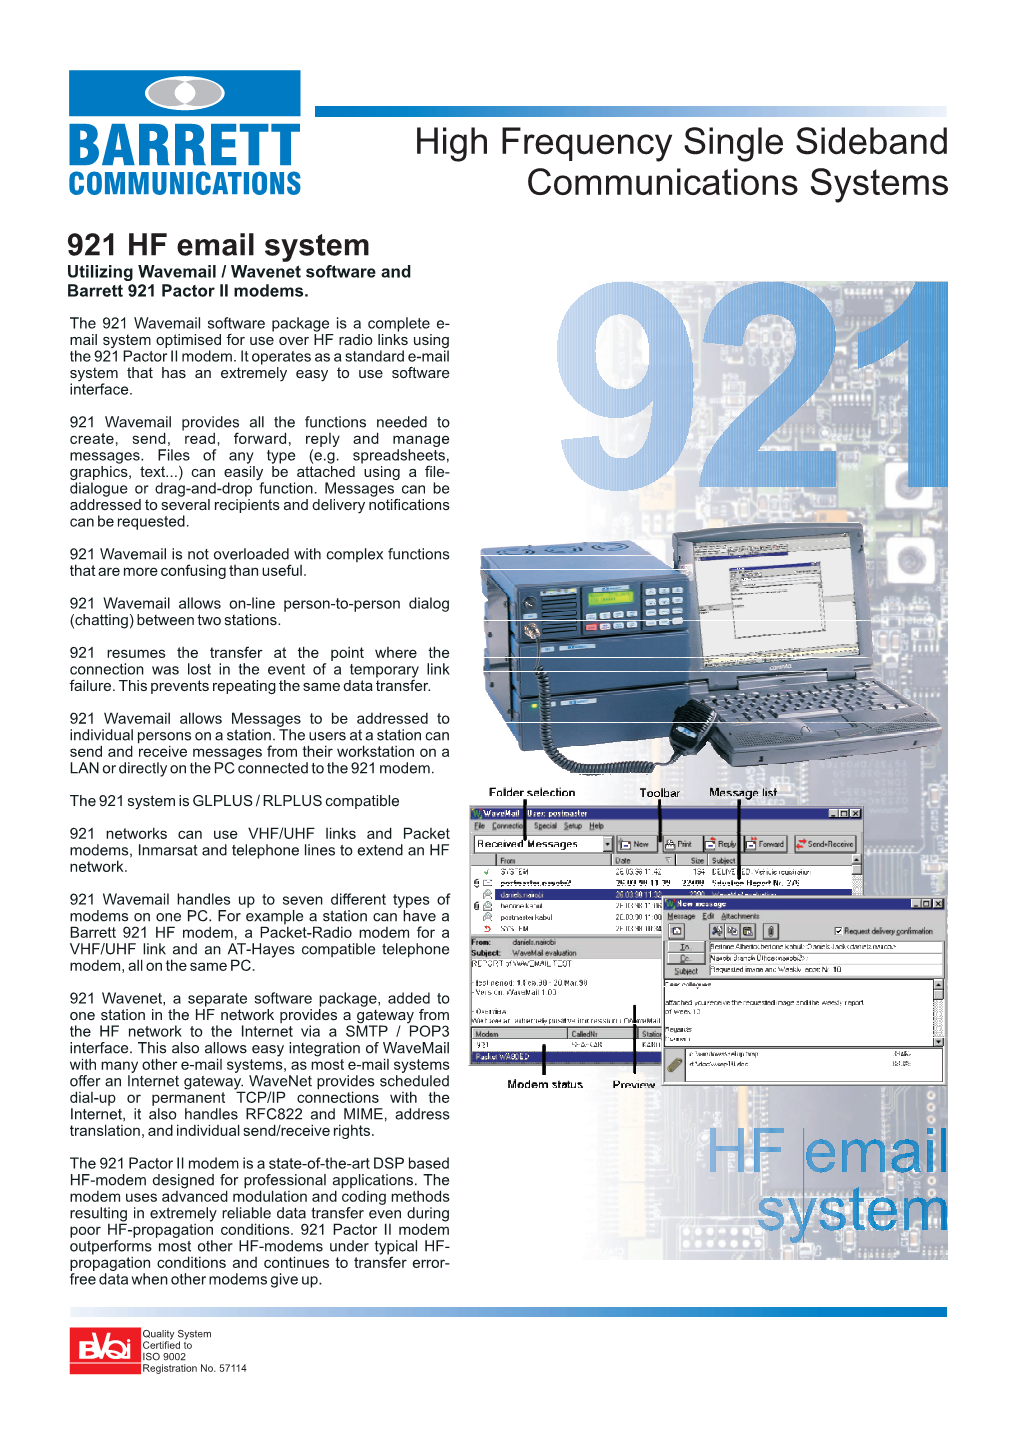 High Frequency Single Sideband Communications Systems 921 HF Email System Utilizing Wavemail / Wavenet Software and Barrett 921 Pactor II Modems